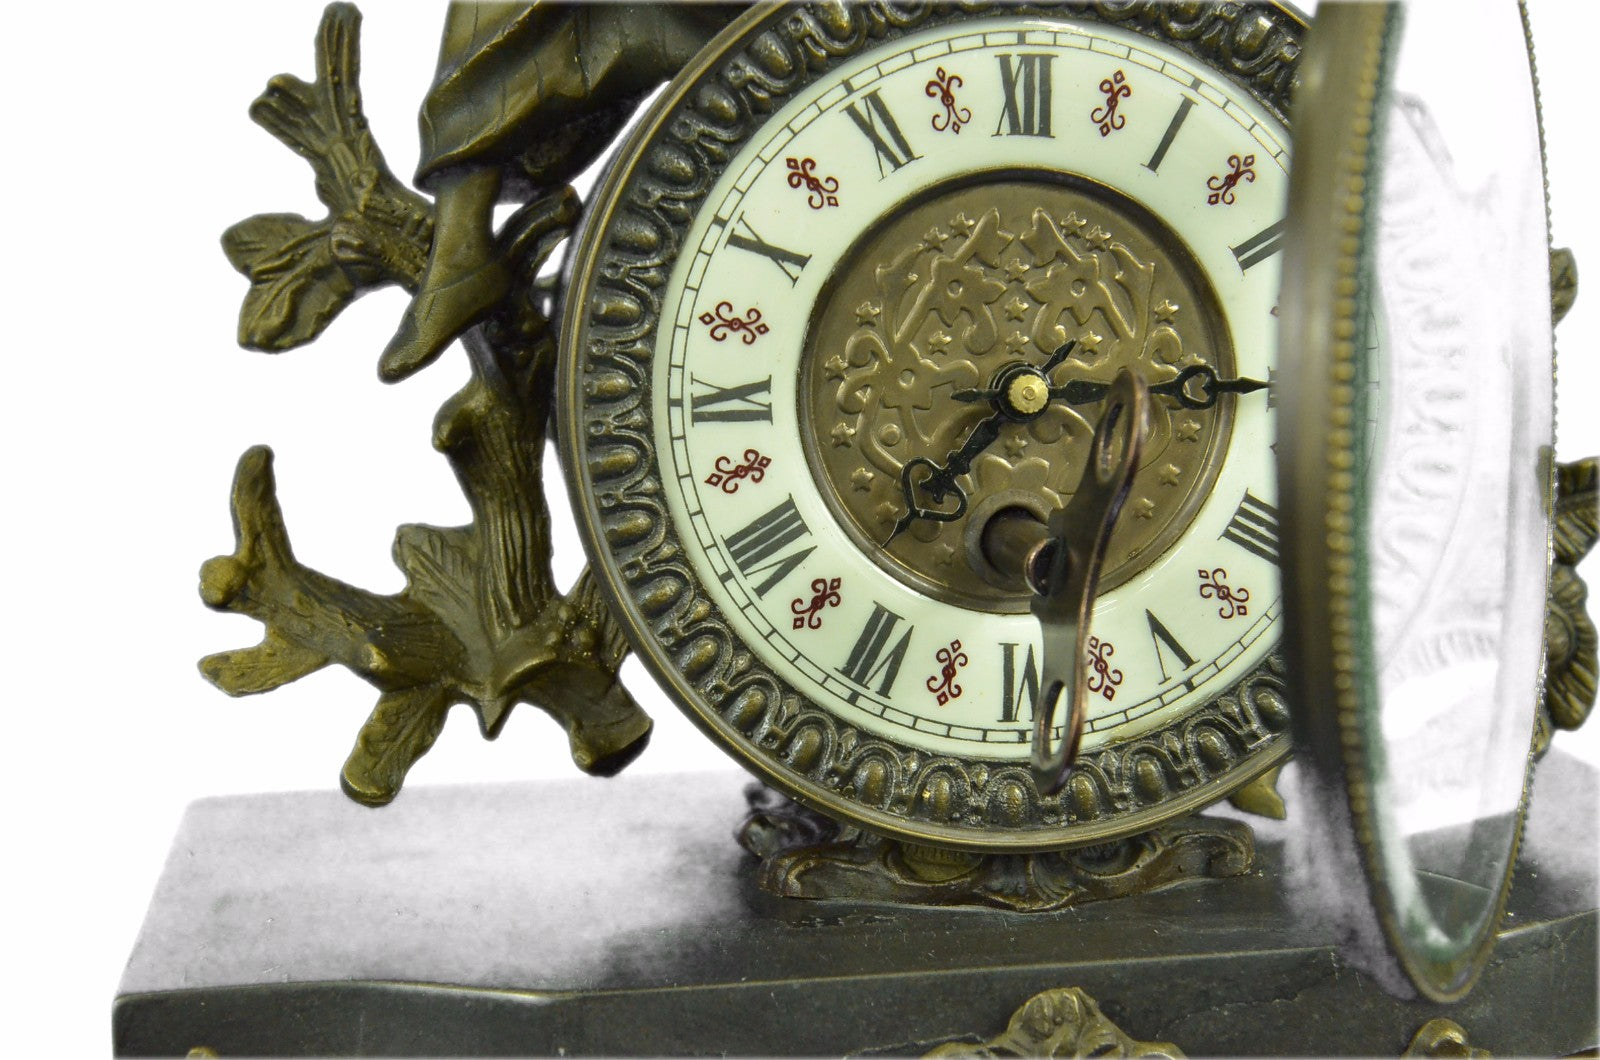 Magnificent Prize Winning Ormolu/Bronze Clock By "Moreau " French Artist Statue